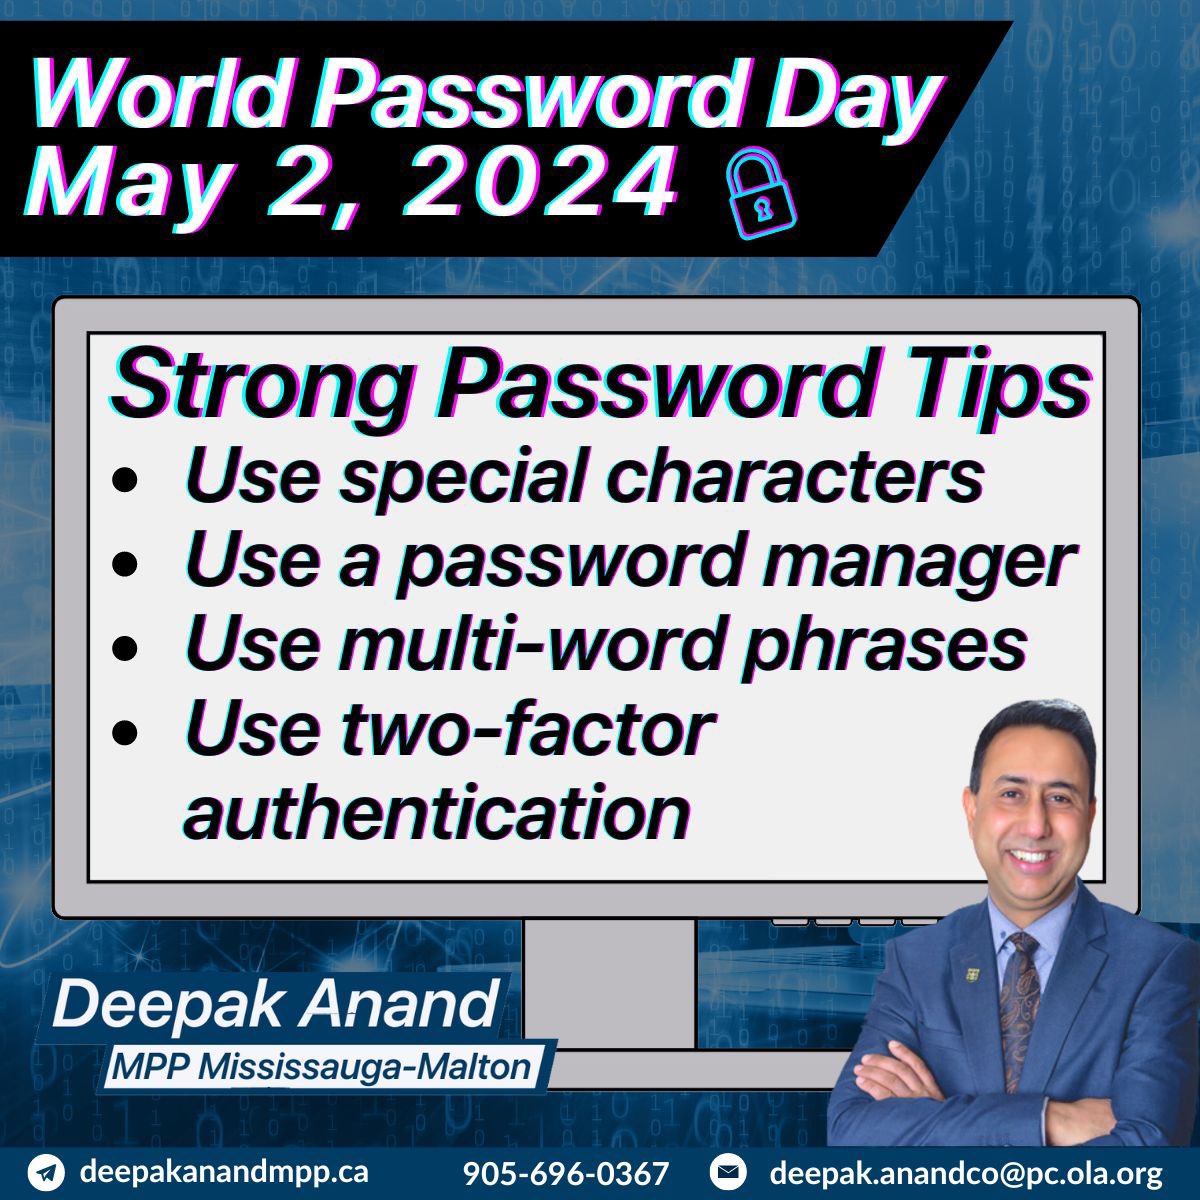 Today is #WorldPasswordDay! #DYK Canadians lost over $567M due to fraud in 2023? The step in protecting yourself online is by using strong P@$$Werrds. Help protect your self, youth and seniors in your life by ensuring passwords are strong, confidential & unique to each account.